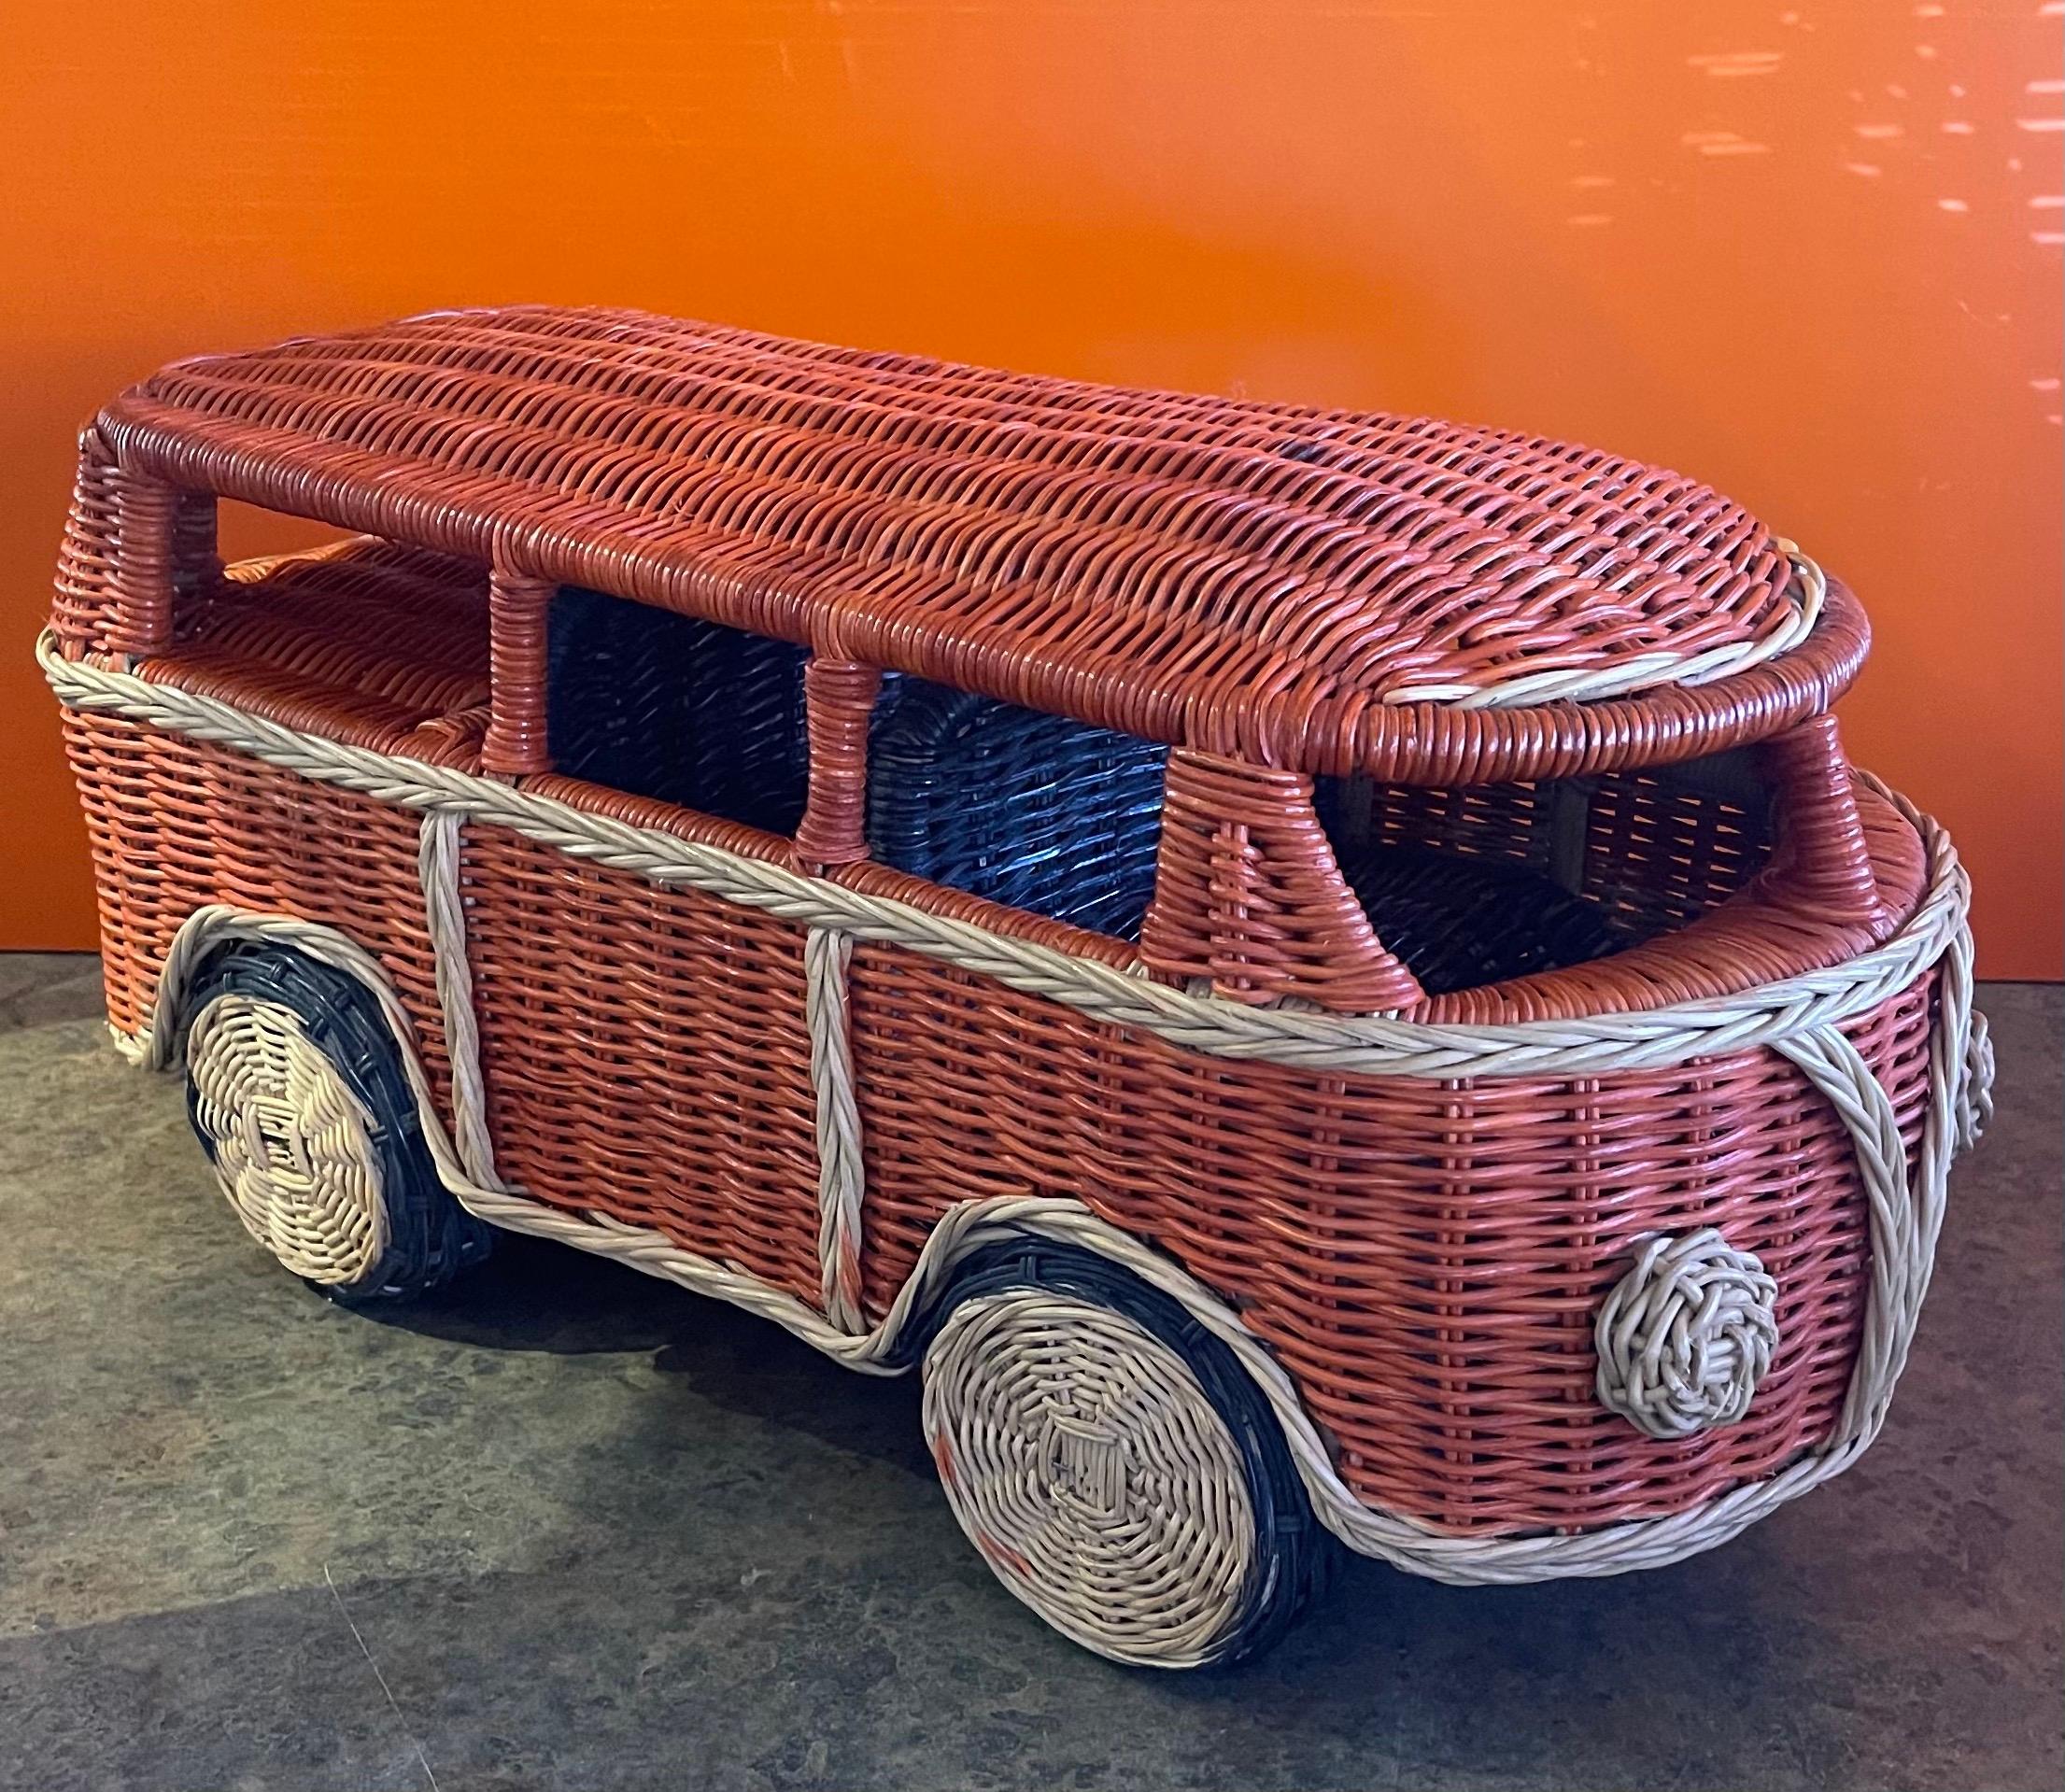 A rare and fun hand-made wicker Volkswagen van / camper sculpture, circa 1970s. The piece is in great vintage condition and measures 21.5